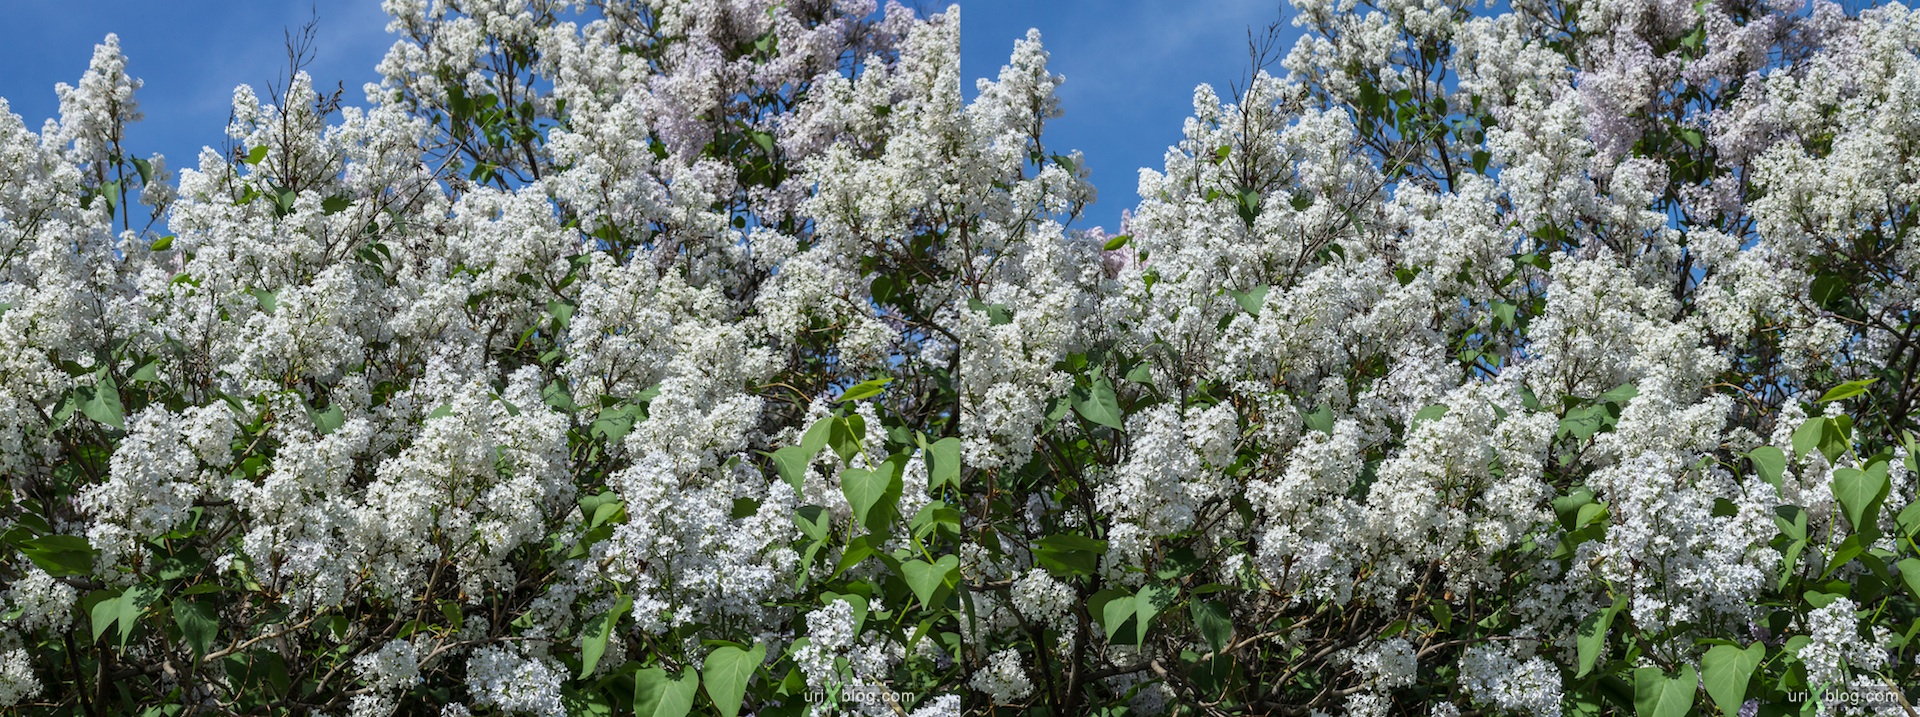 2013, Lilac tree, flower, grass, park, field, Moscow, Russia, spring, 3D, stereo pair, cross-eyed, crossview, cross view stereo pair, stereoscopic